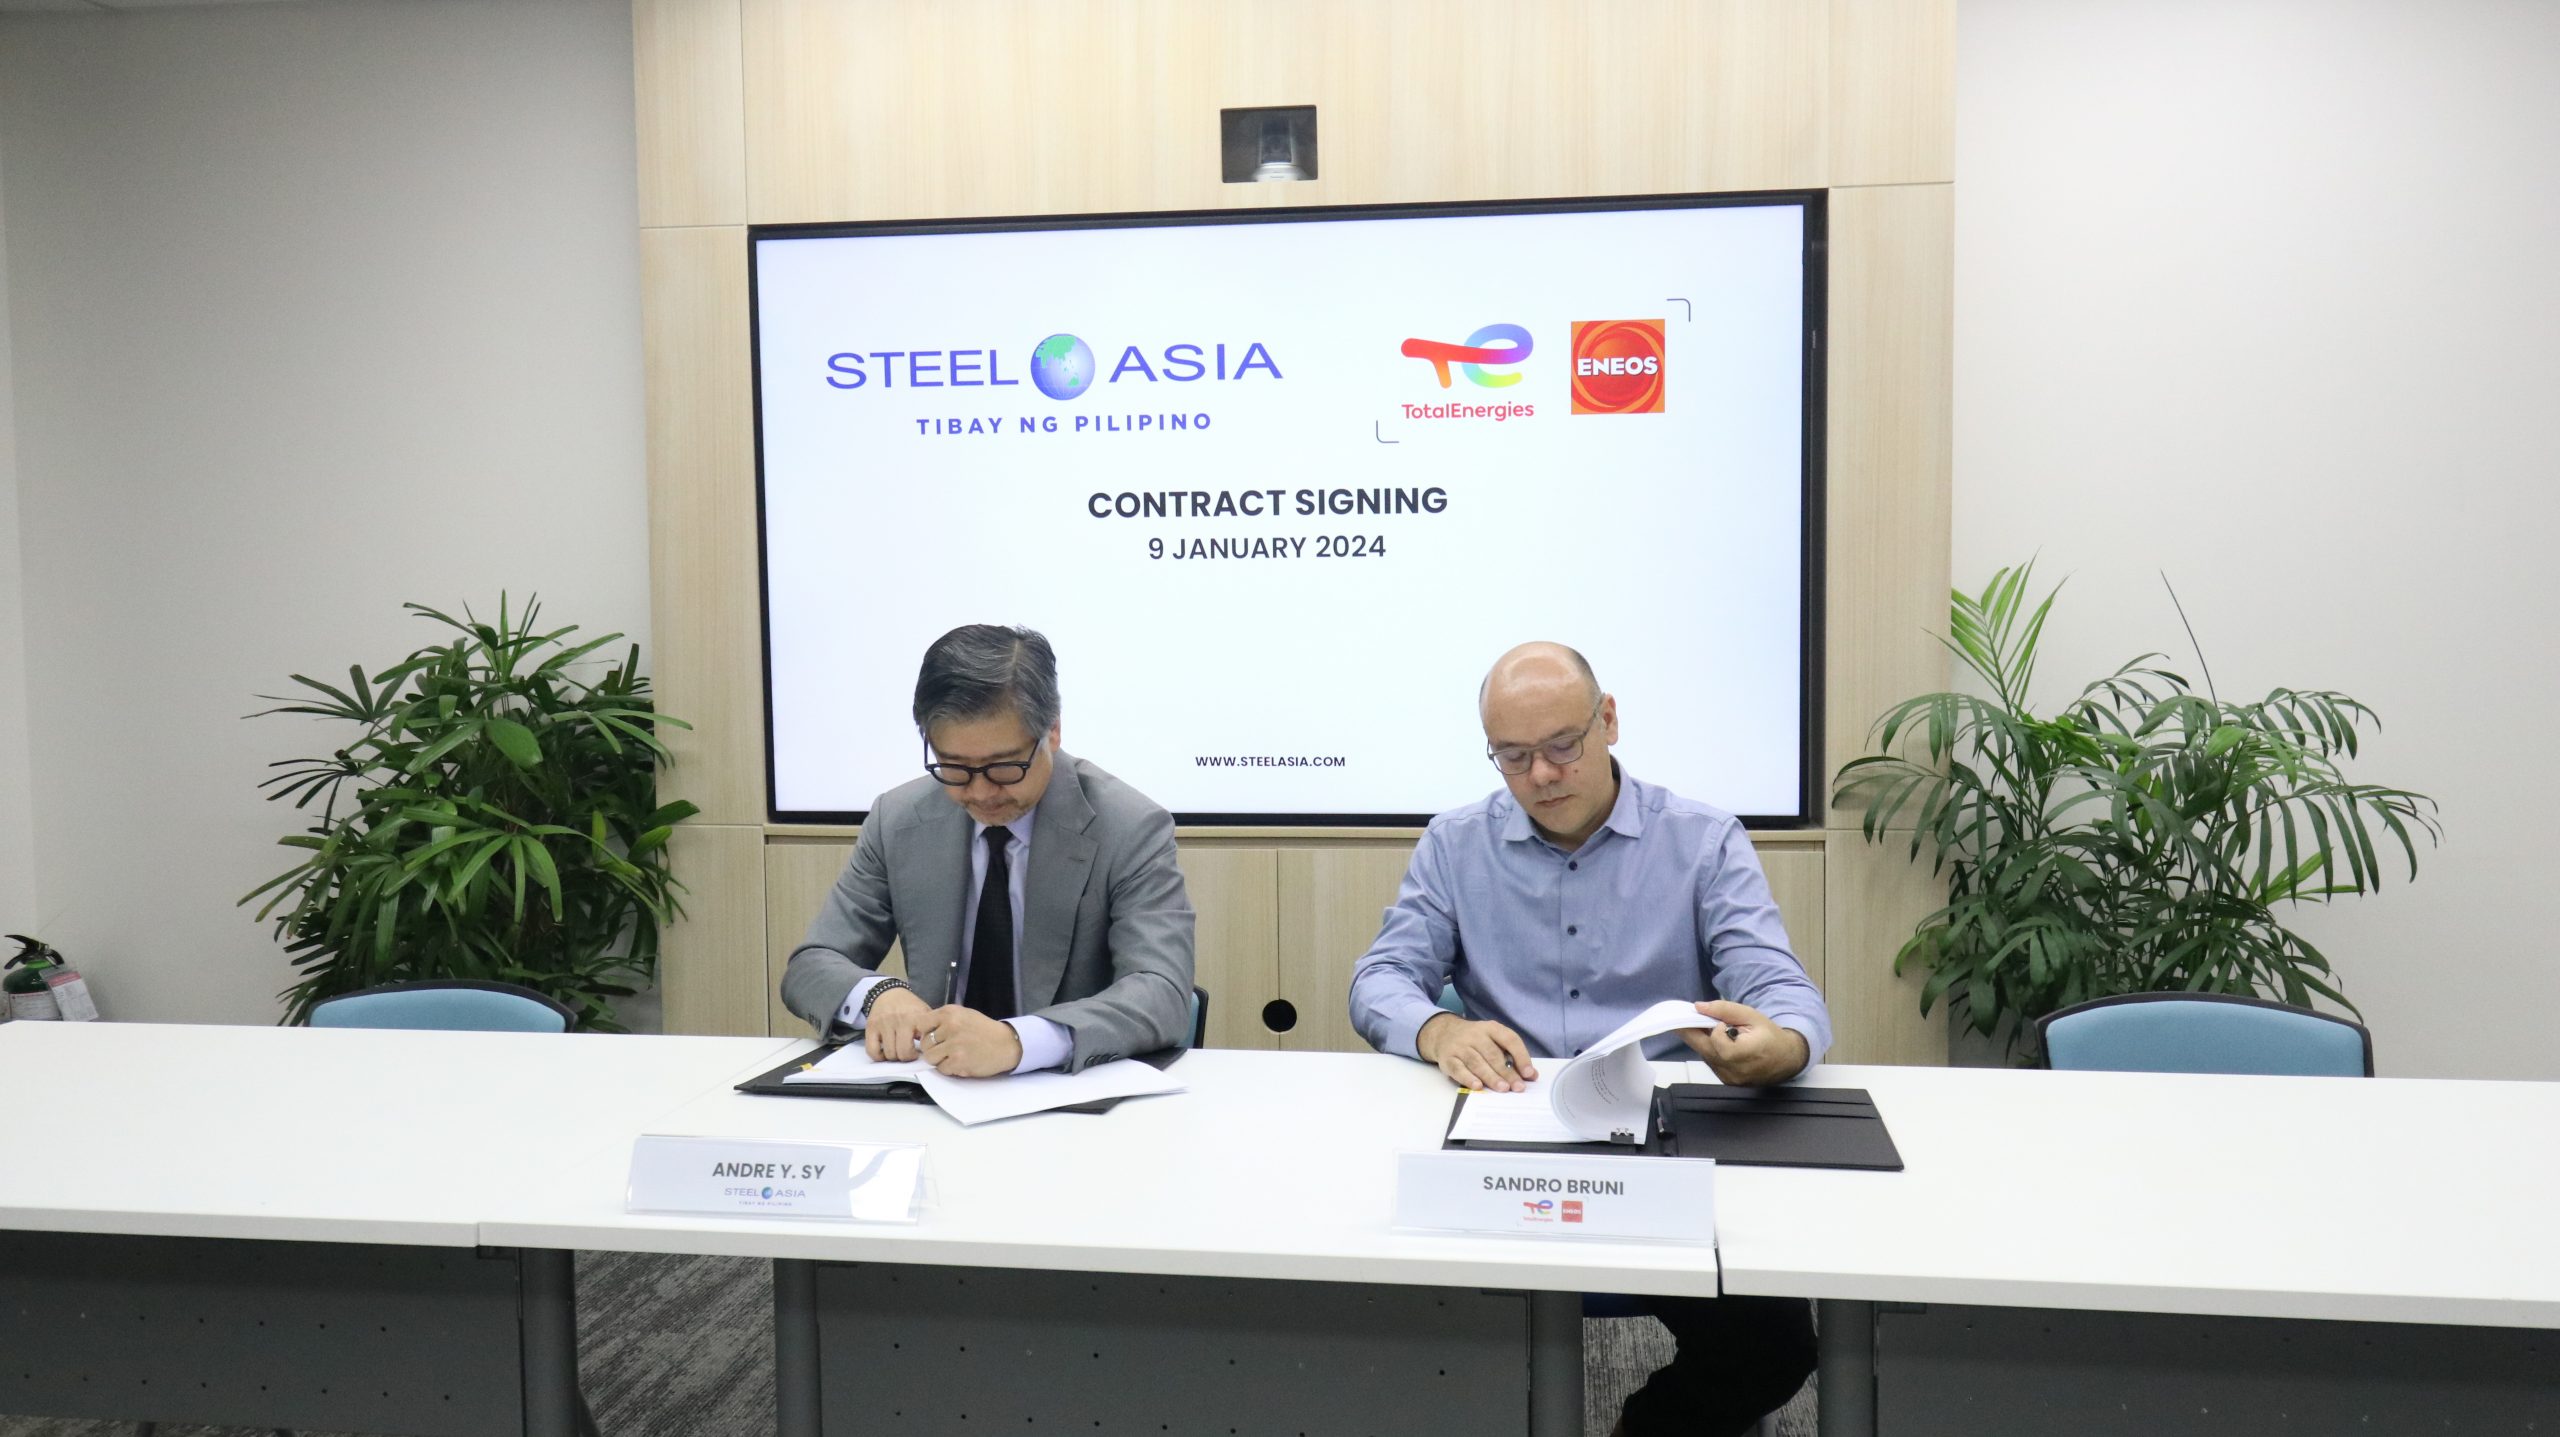 Image: signing ceremony between TotalEnergies ENEOS and SteelAsia